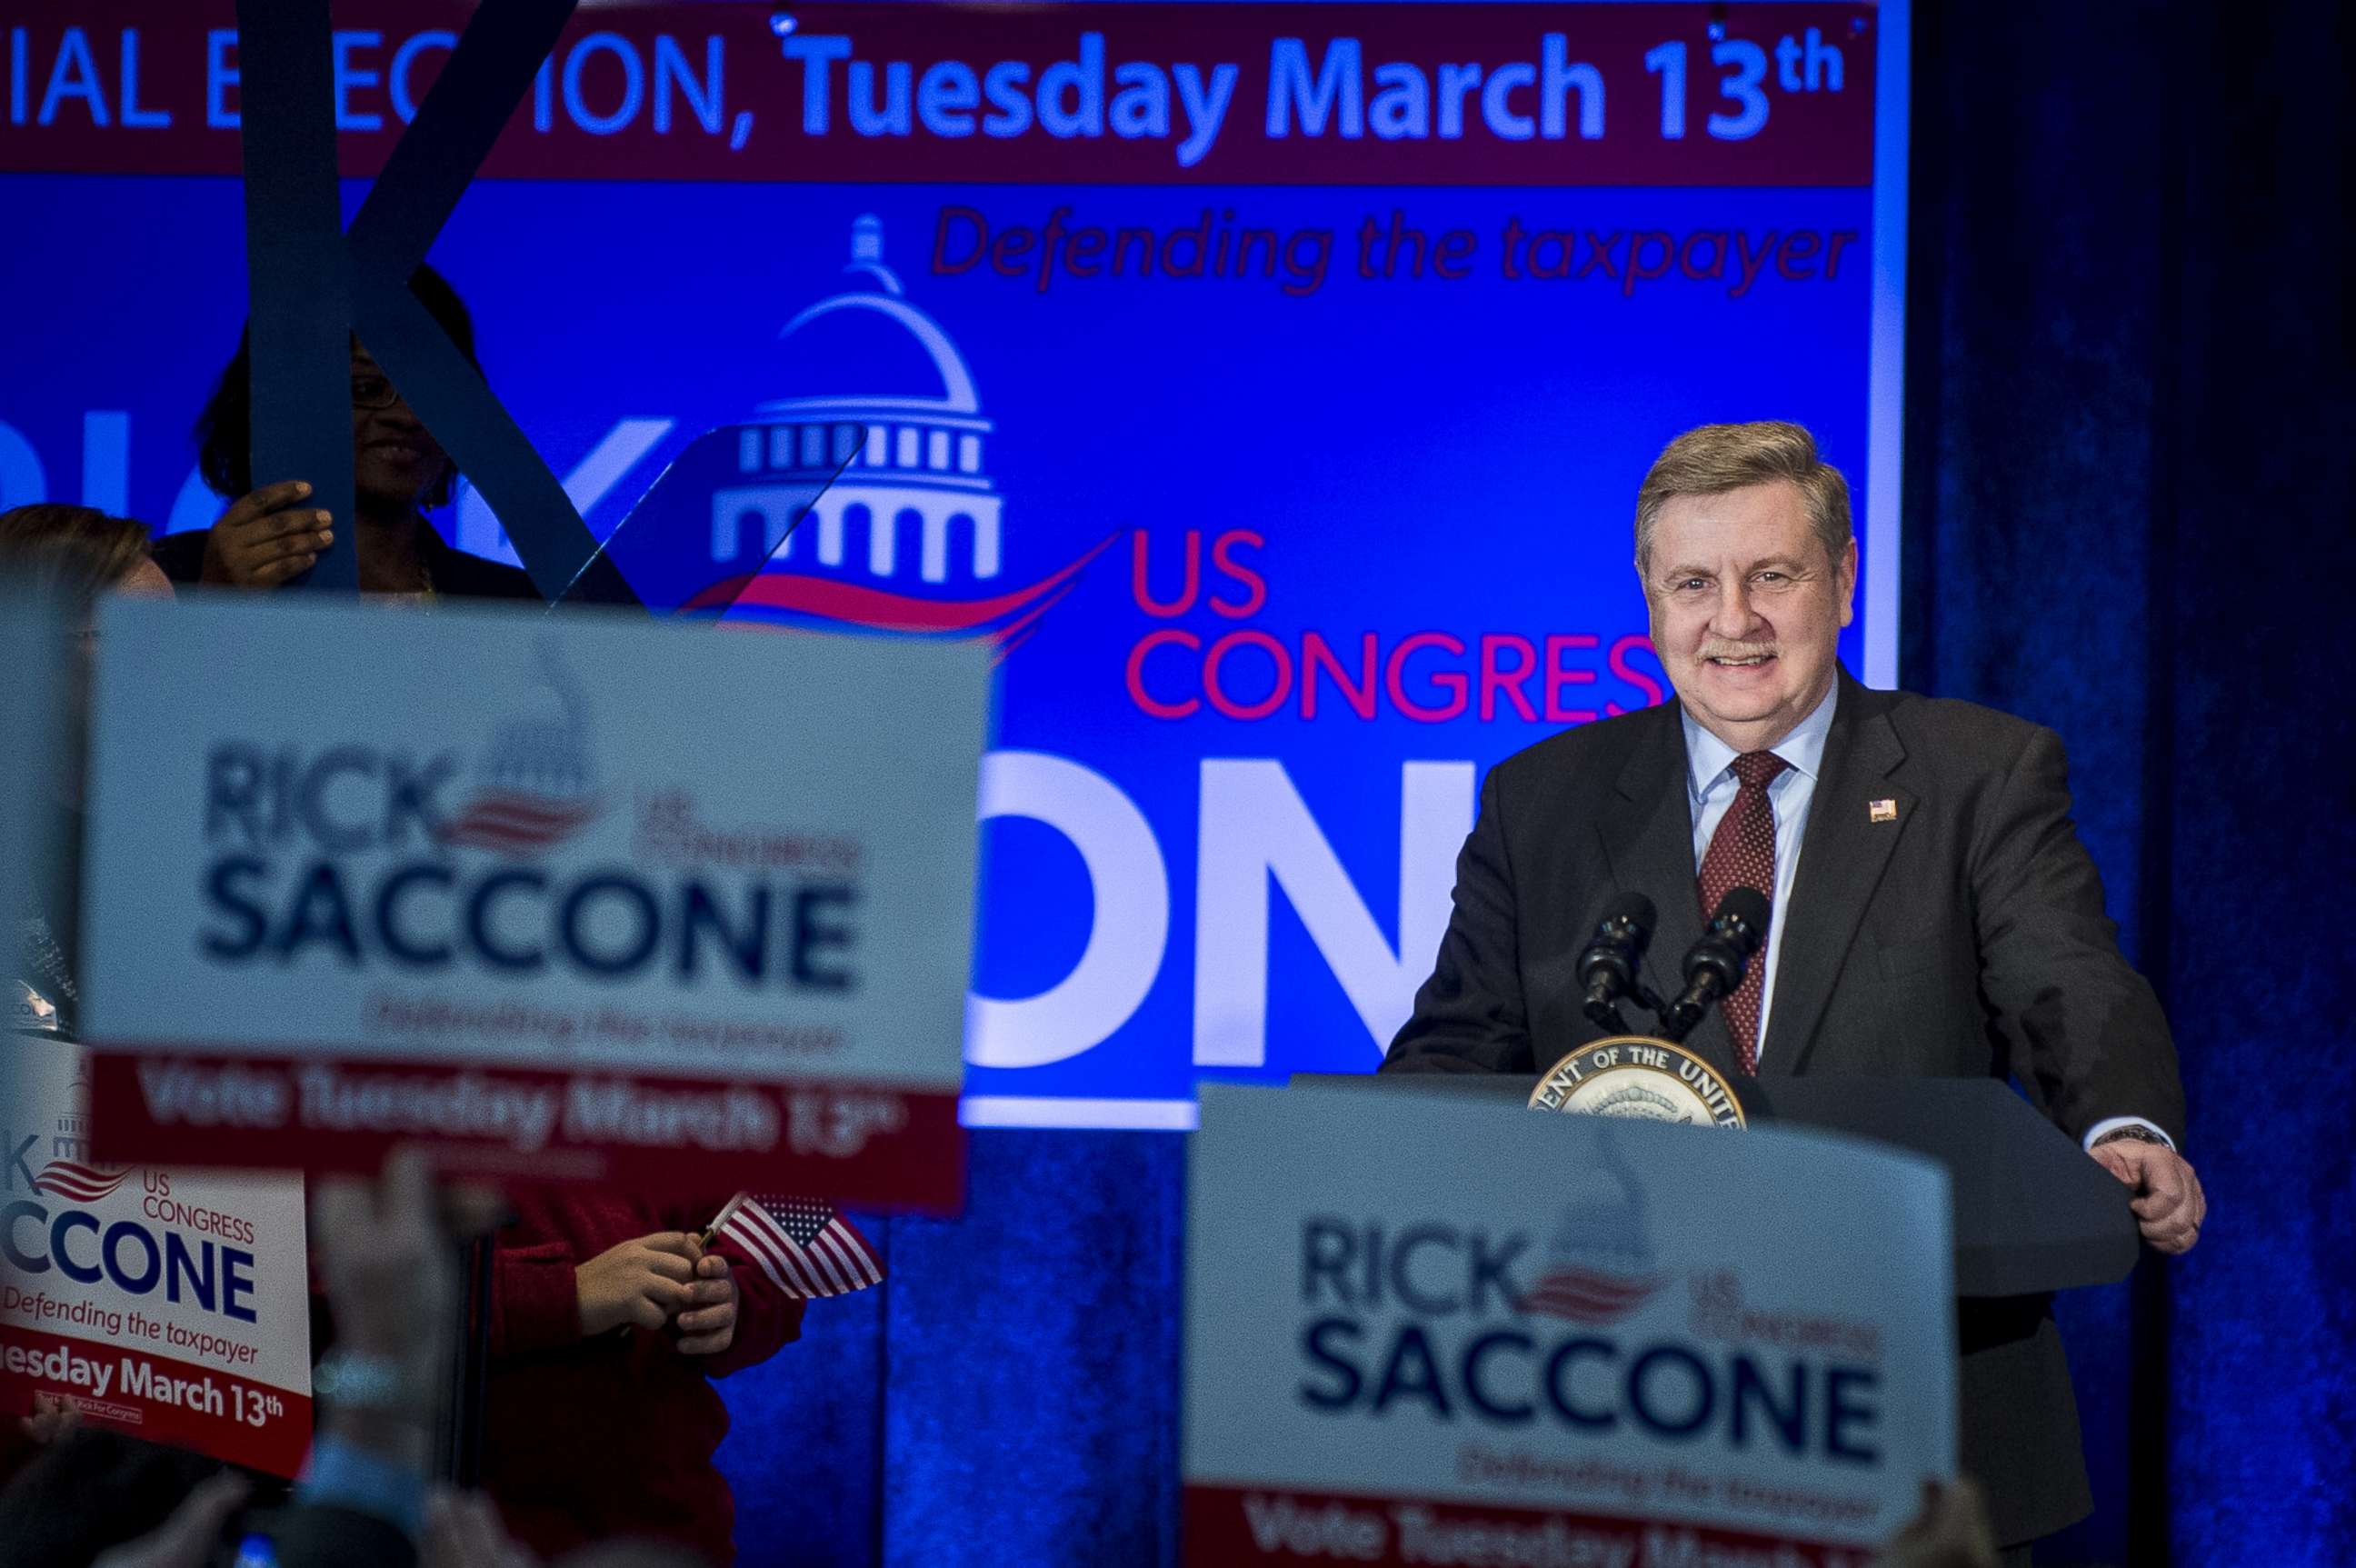 PHOTO: Republican Pennsylvania congressional candidate Rick Saccone speaks during a campaign event at the Bethel Park Community Center, Feb. 2, 2018 in Bethel Park, Pa.